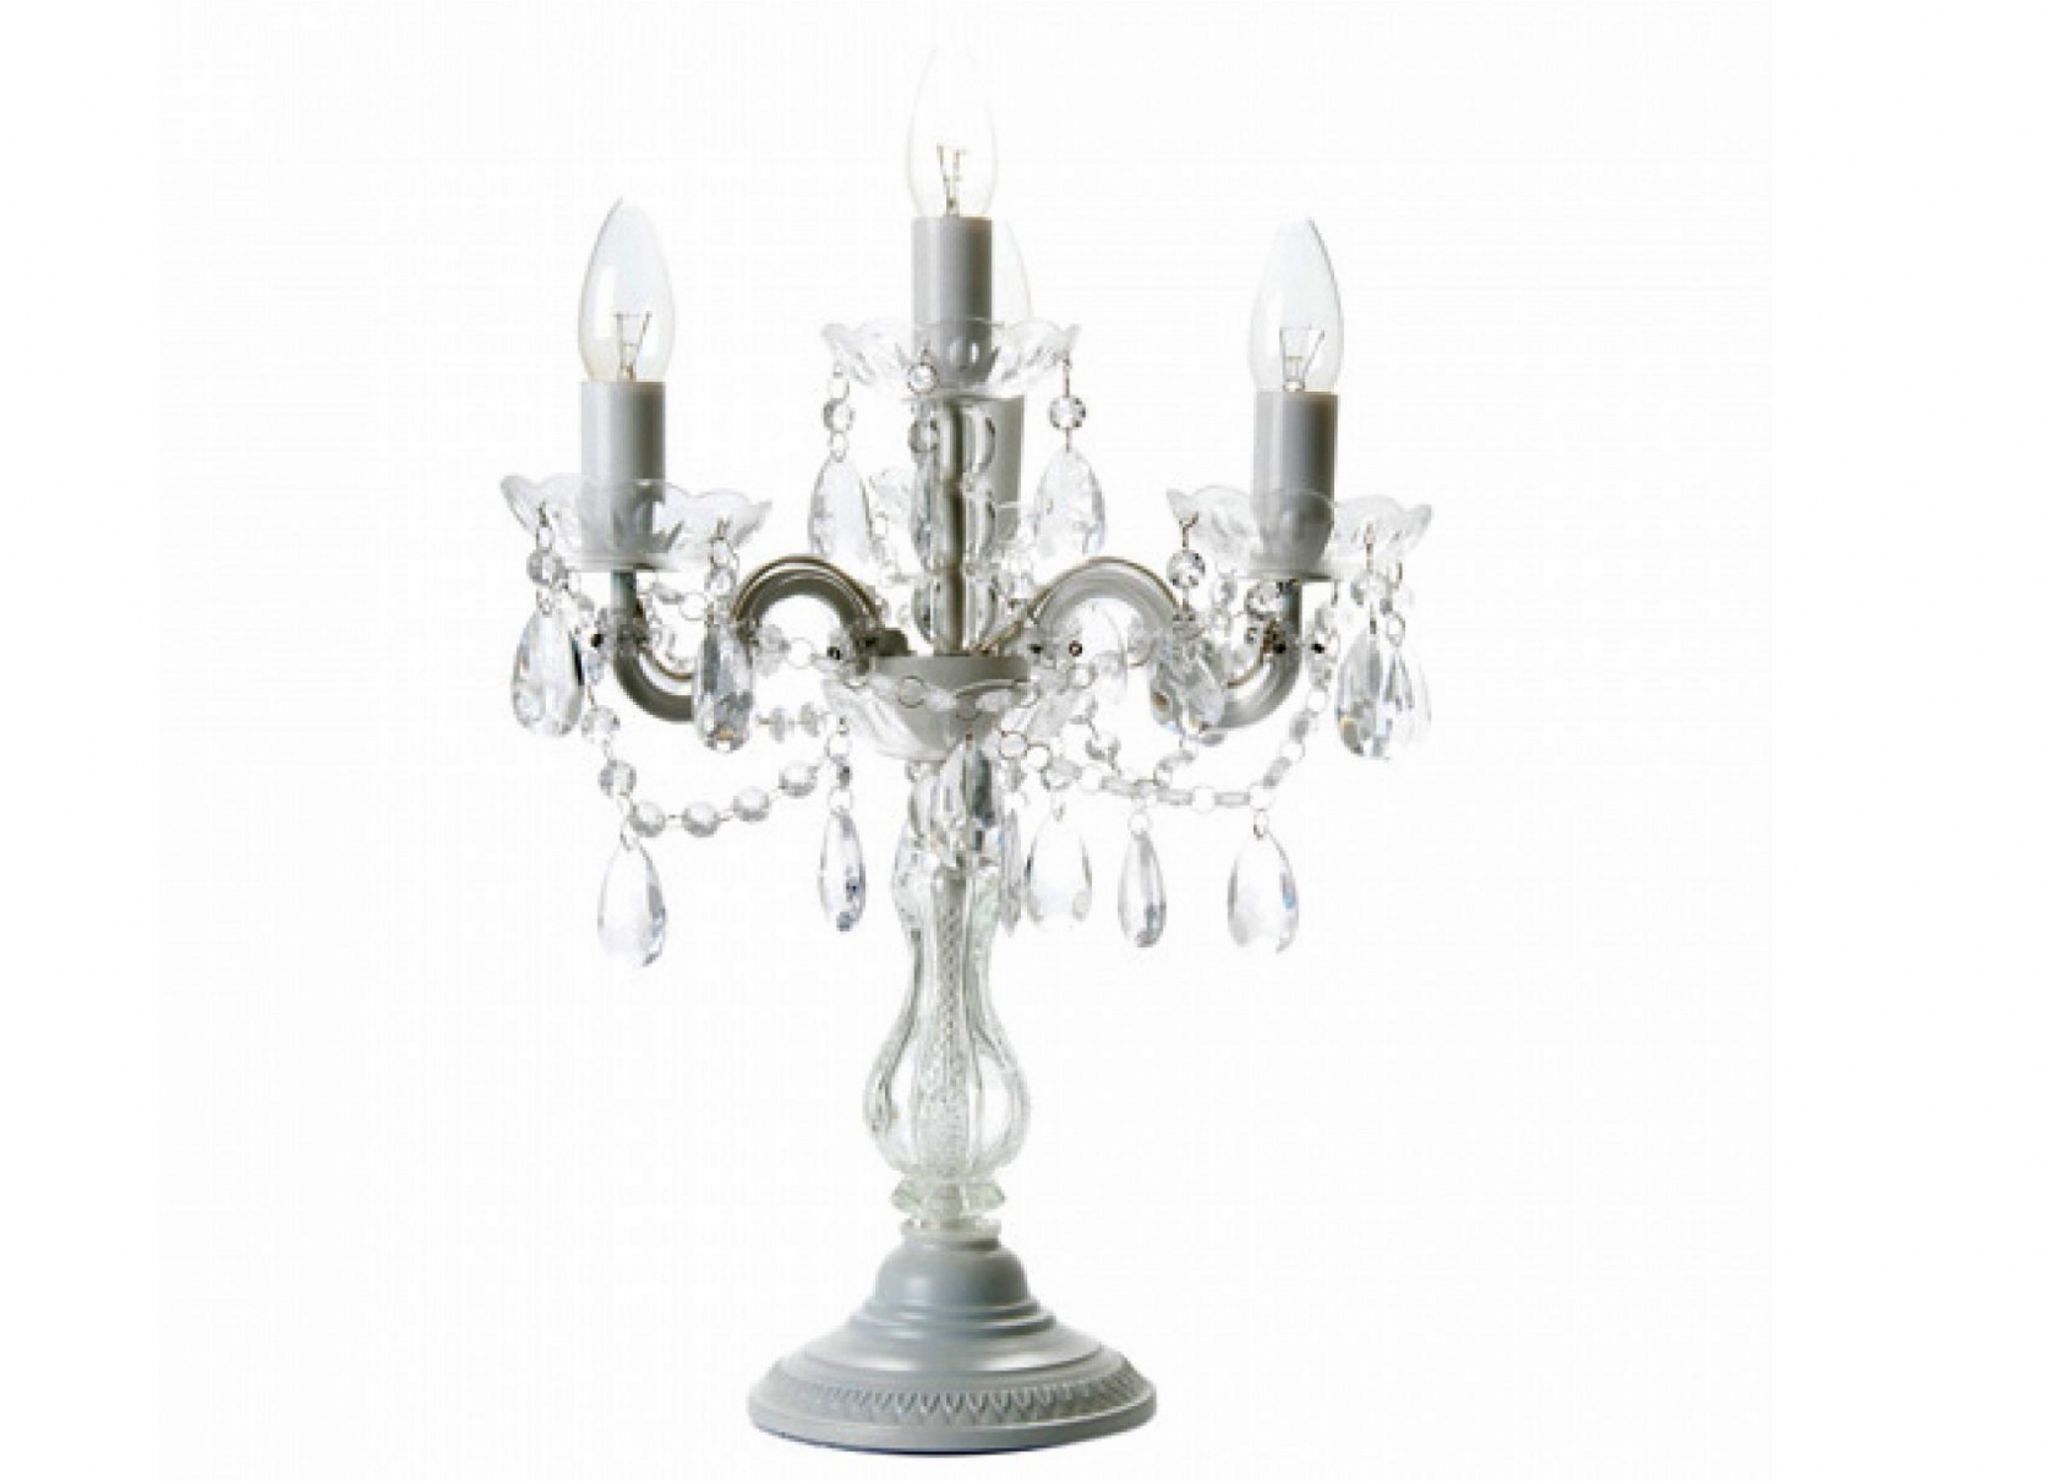 Chandelier Table Lamp Uk Xiedp Lights Decoration Regarding Crystal Table Chandeliers (View 12 of 15)